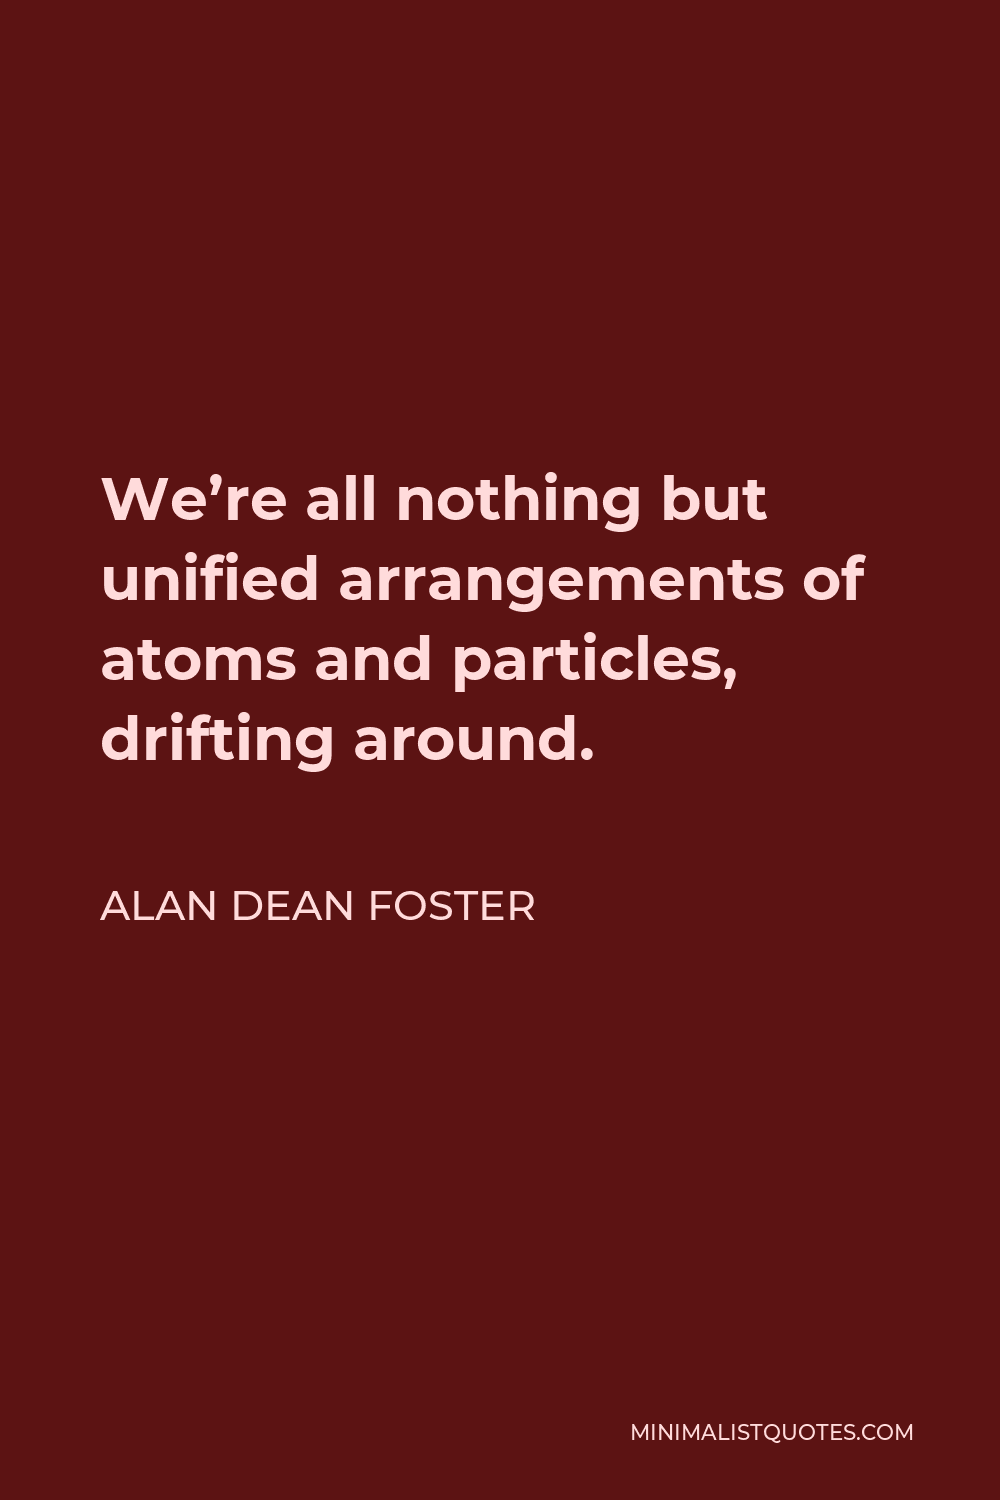 Alan Dean Foster Quote - We’re all nothing but unified arrangements of atoms and particles, drifting around.